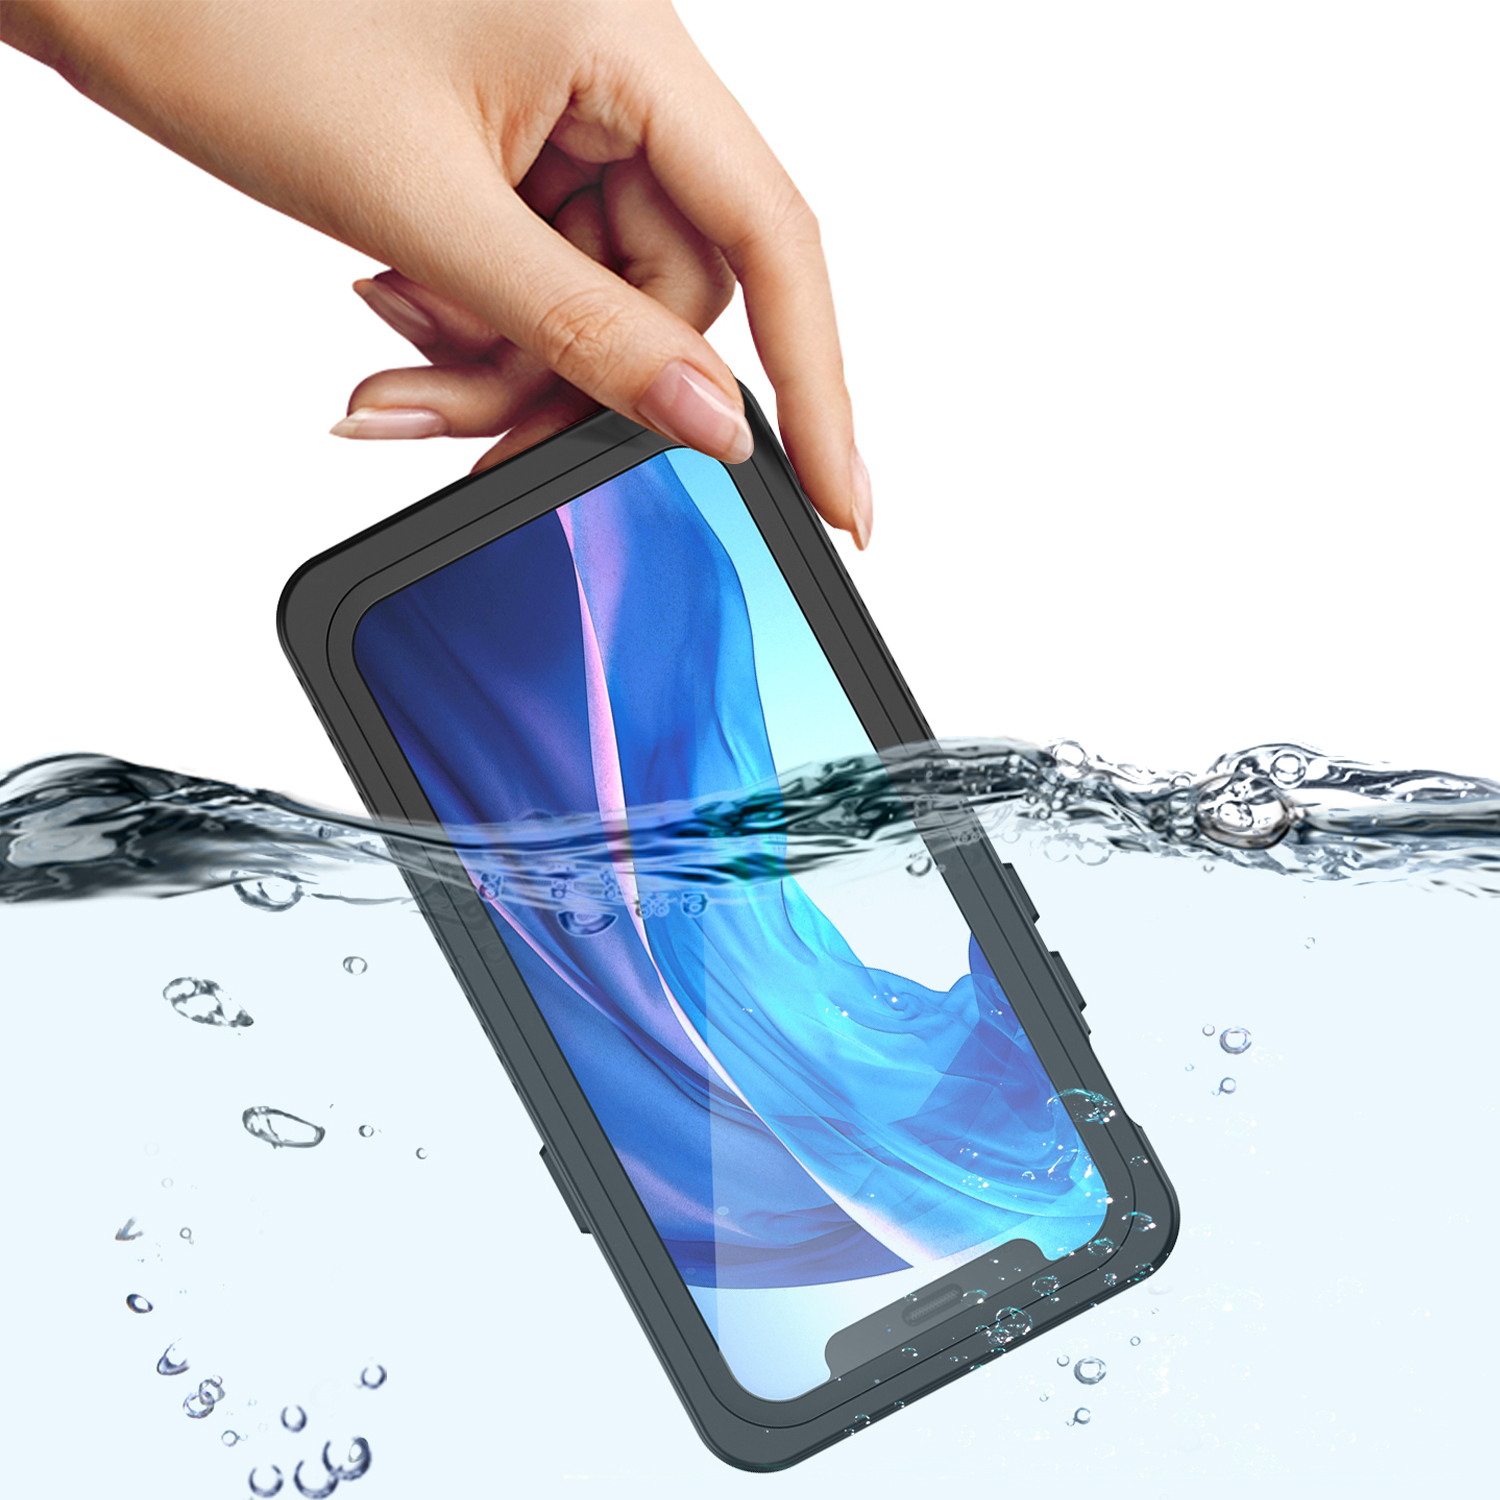 Bakeey-Transparent-Touch-Screen-PC--TPU-Shockproof-Dustproof-IP68-Waterproof-with-Lens-Protect-Full--1754354-9